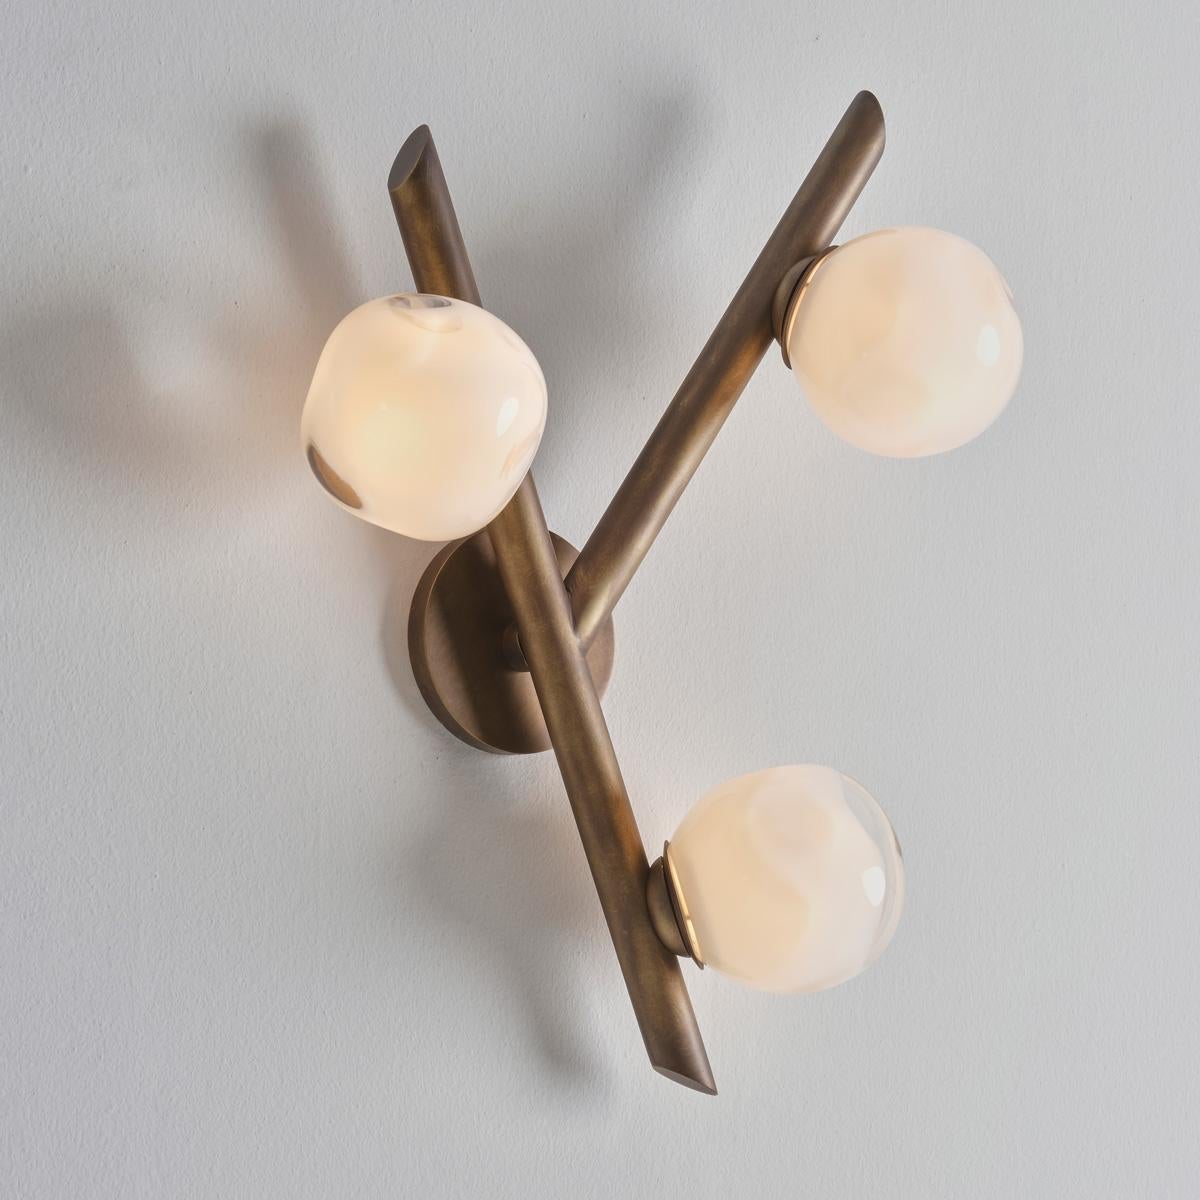 The Antares wall light harmoniously balances the linear details of its intersecting arms with the organic form of its handblown glass shades. The first images show the fixture in our Bronzo Nuvolato (bronze) finish-subsequent pictures show it in a